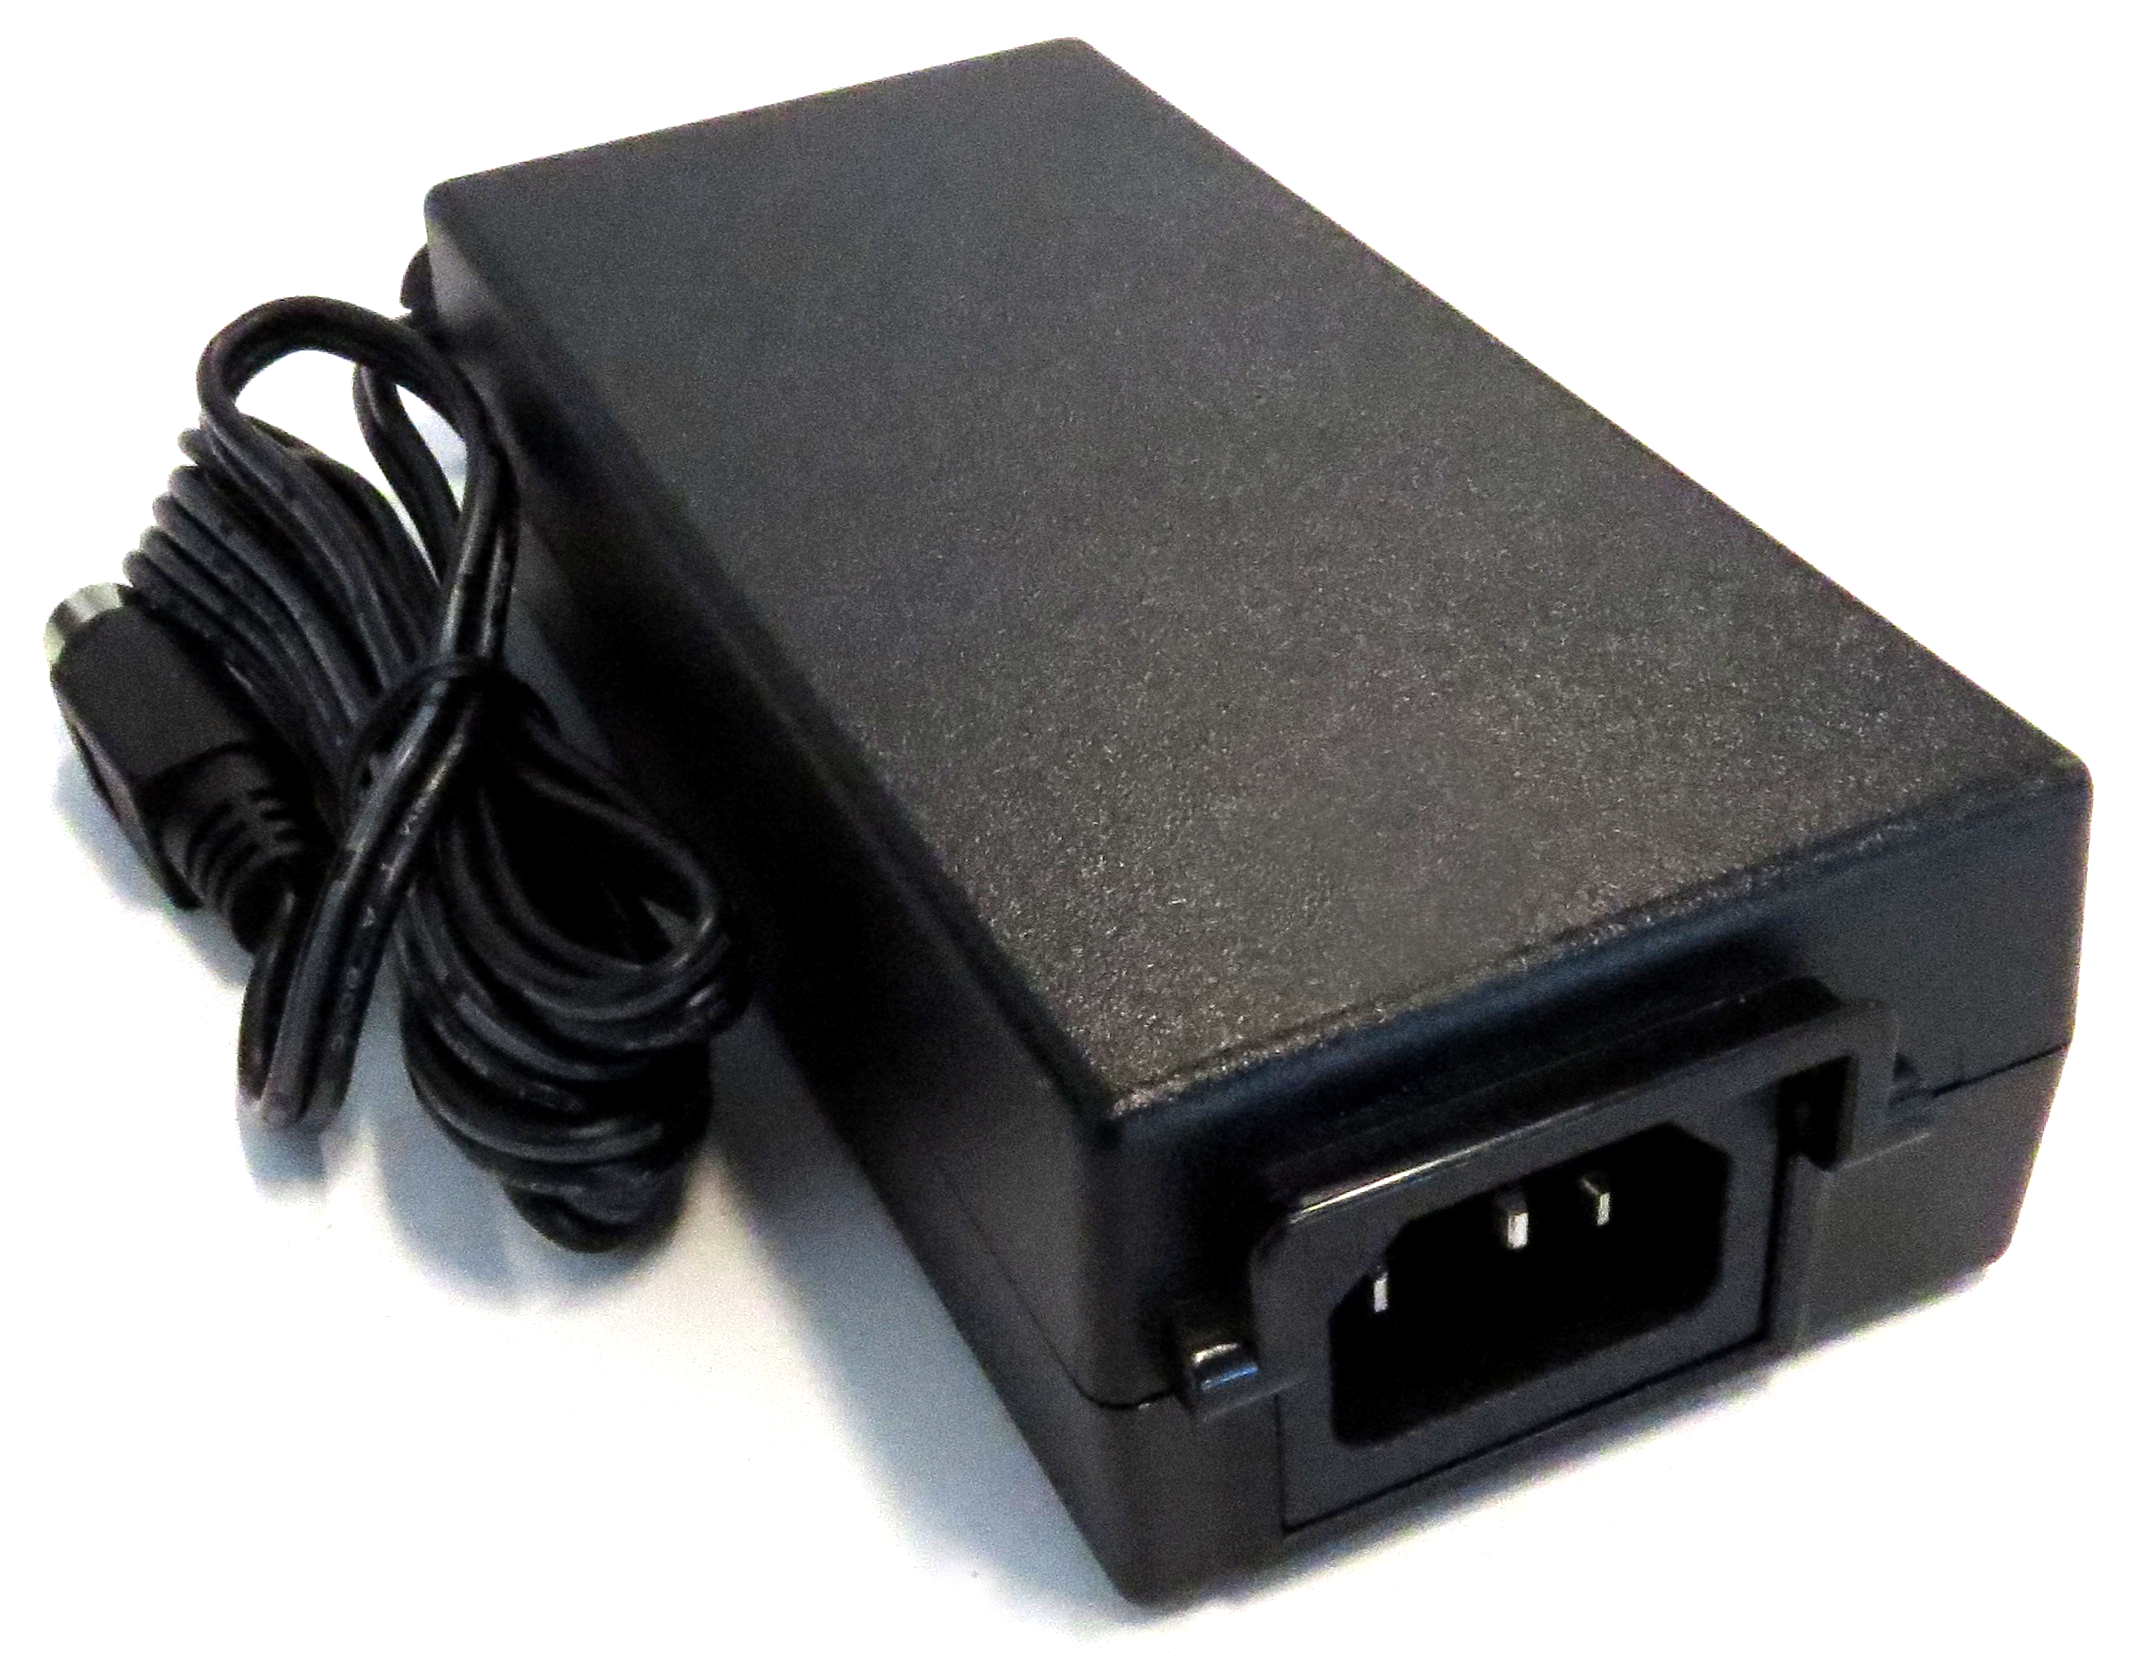 This image shows the External Power Supply for Oracle MICROS Compact Workstation 3 Series.